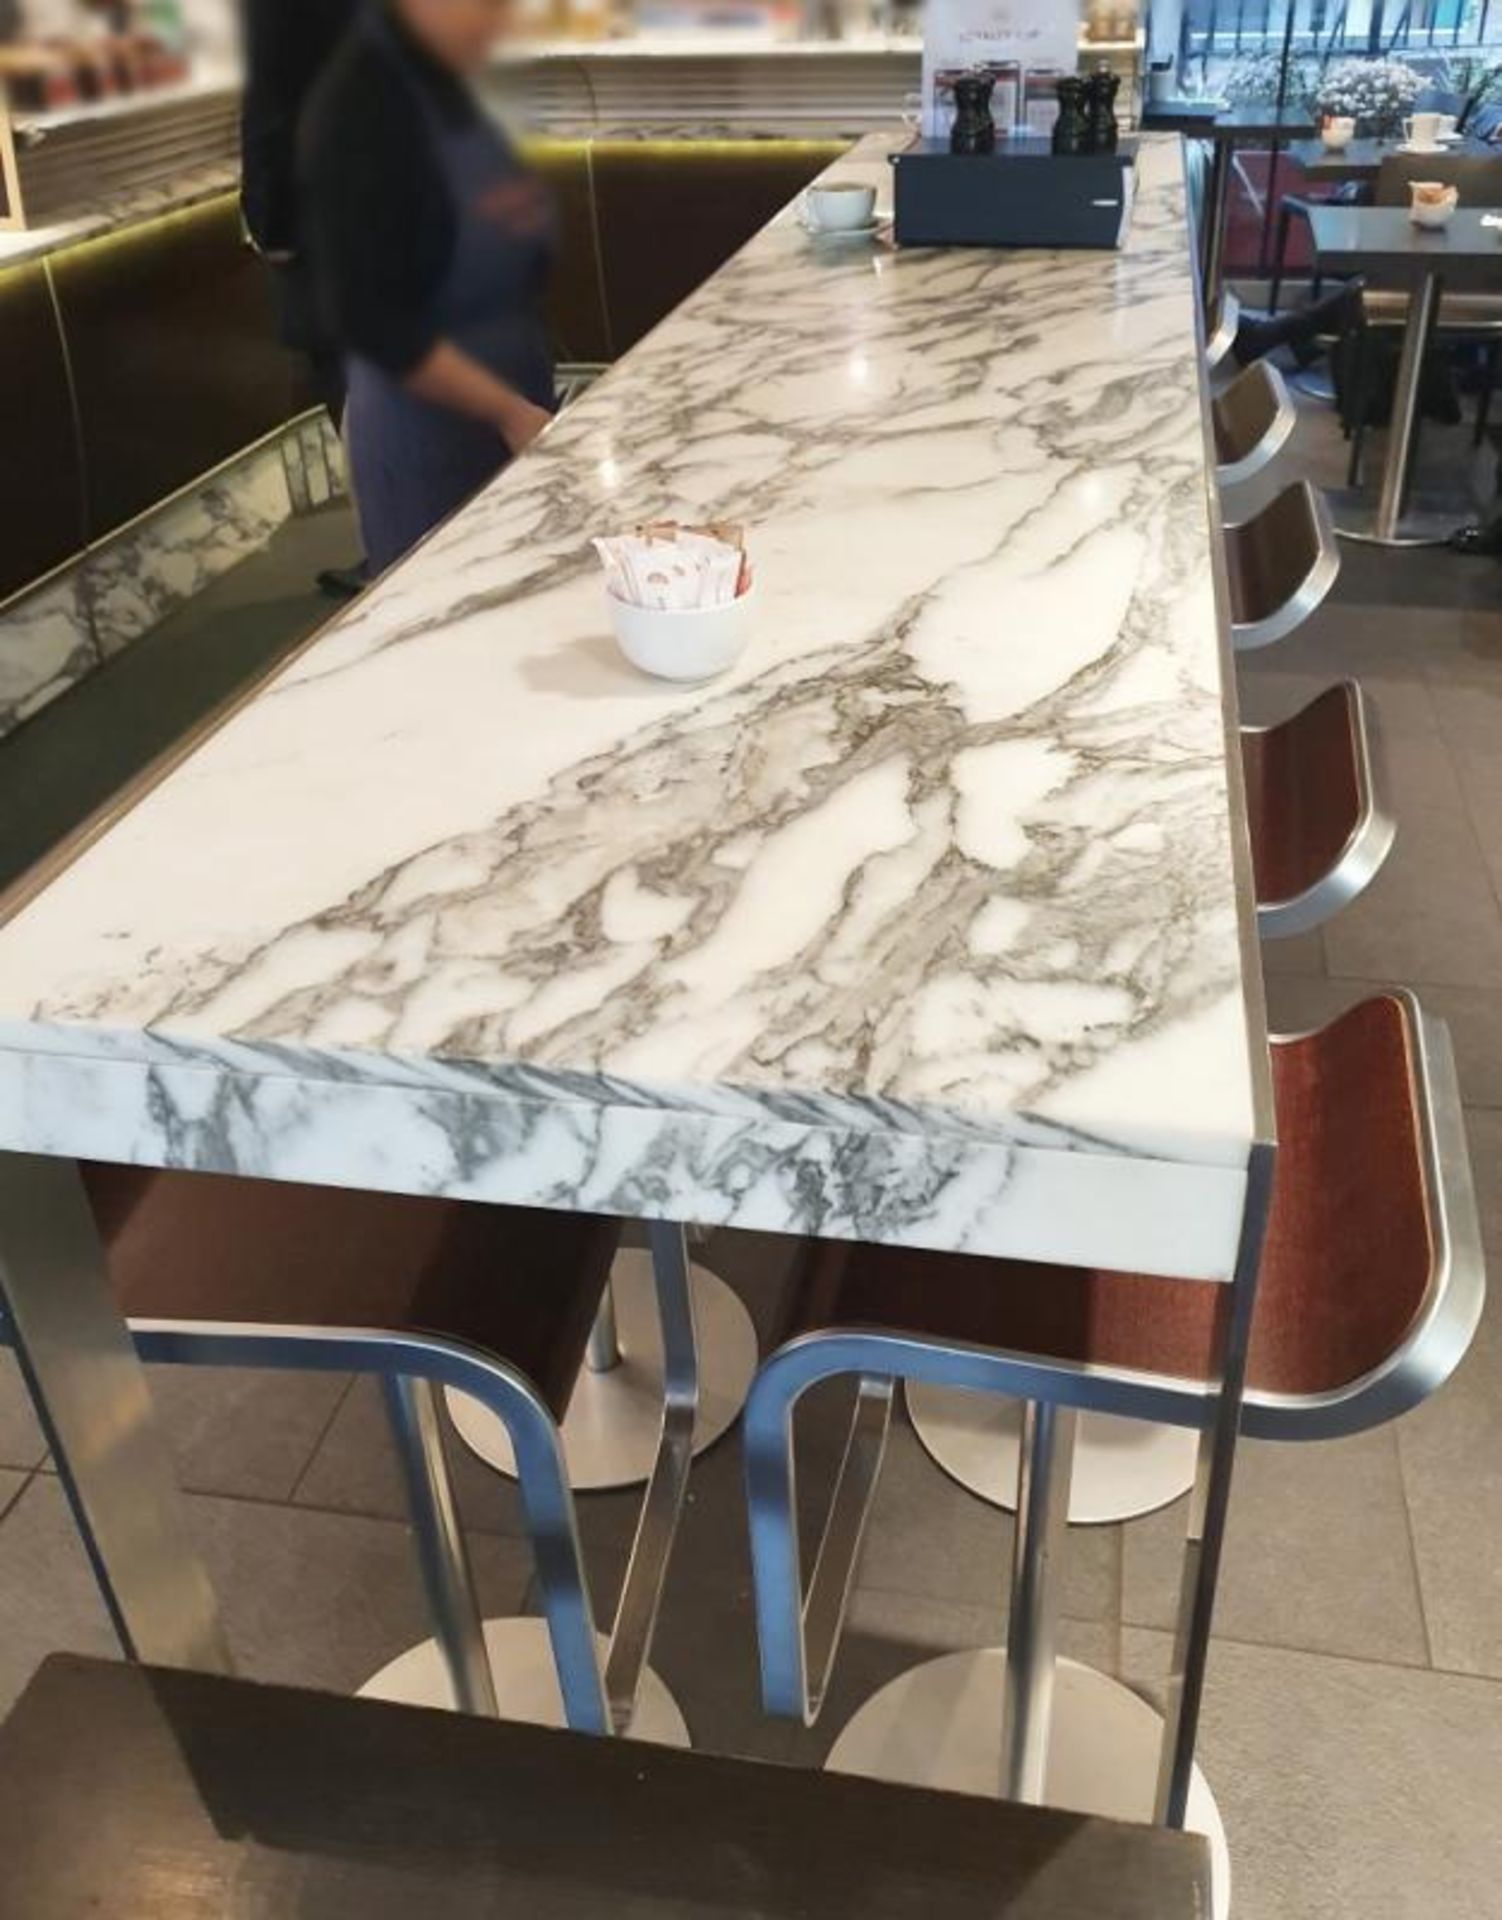 1 x White Marble/Granite Topped Cocktail Table - From A Milan-style City Centre Cafe